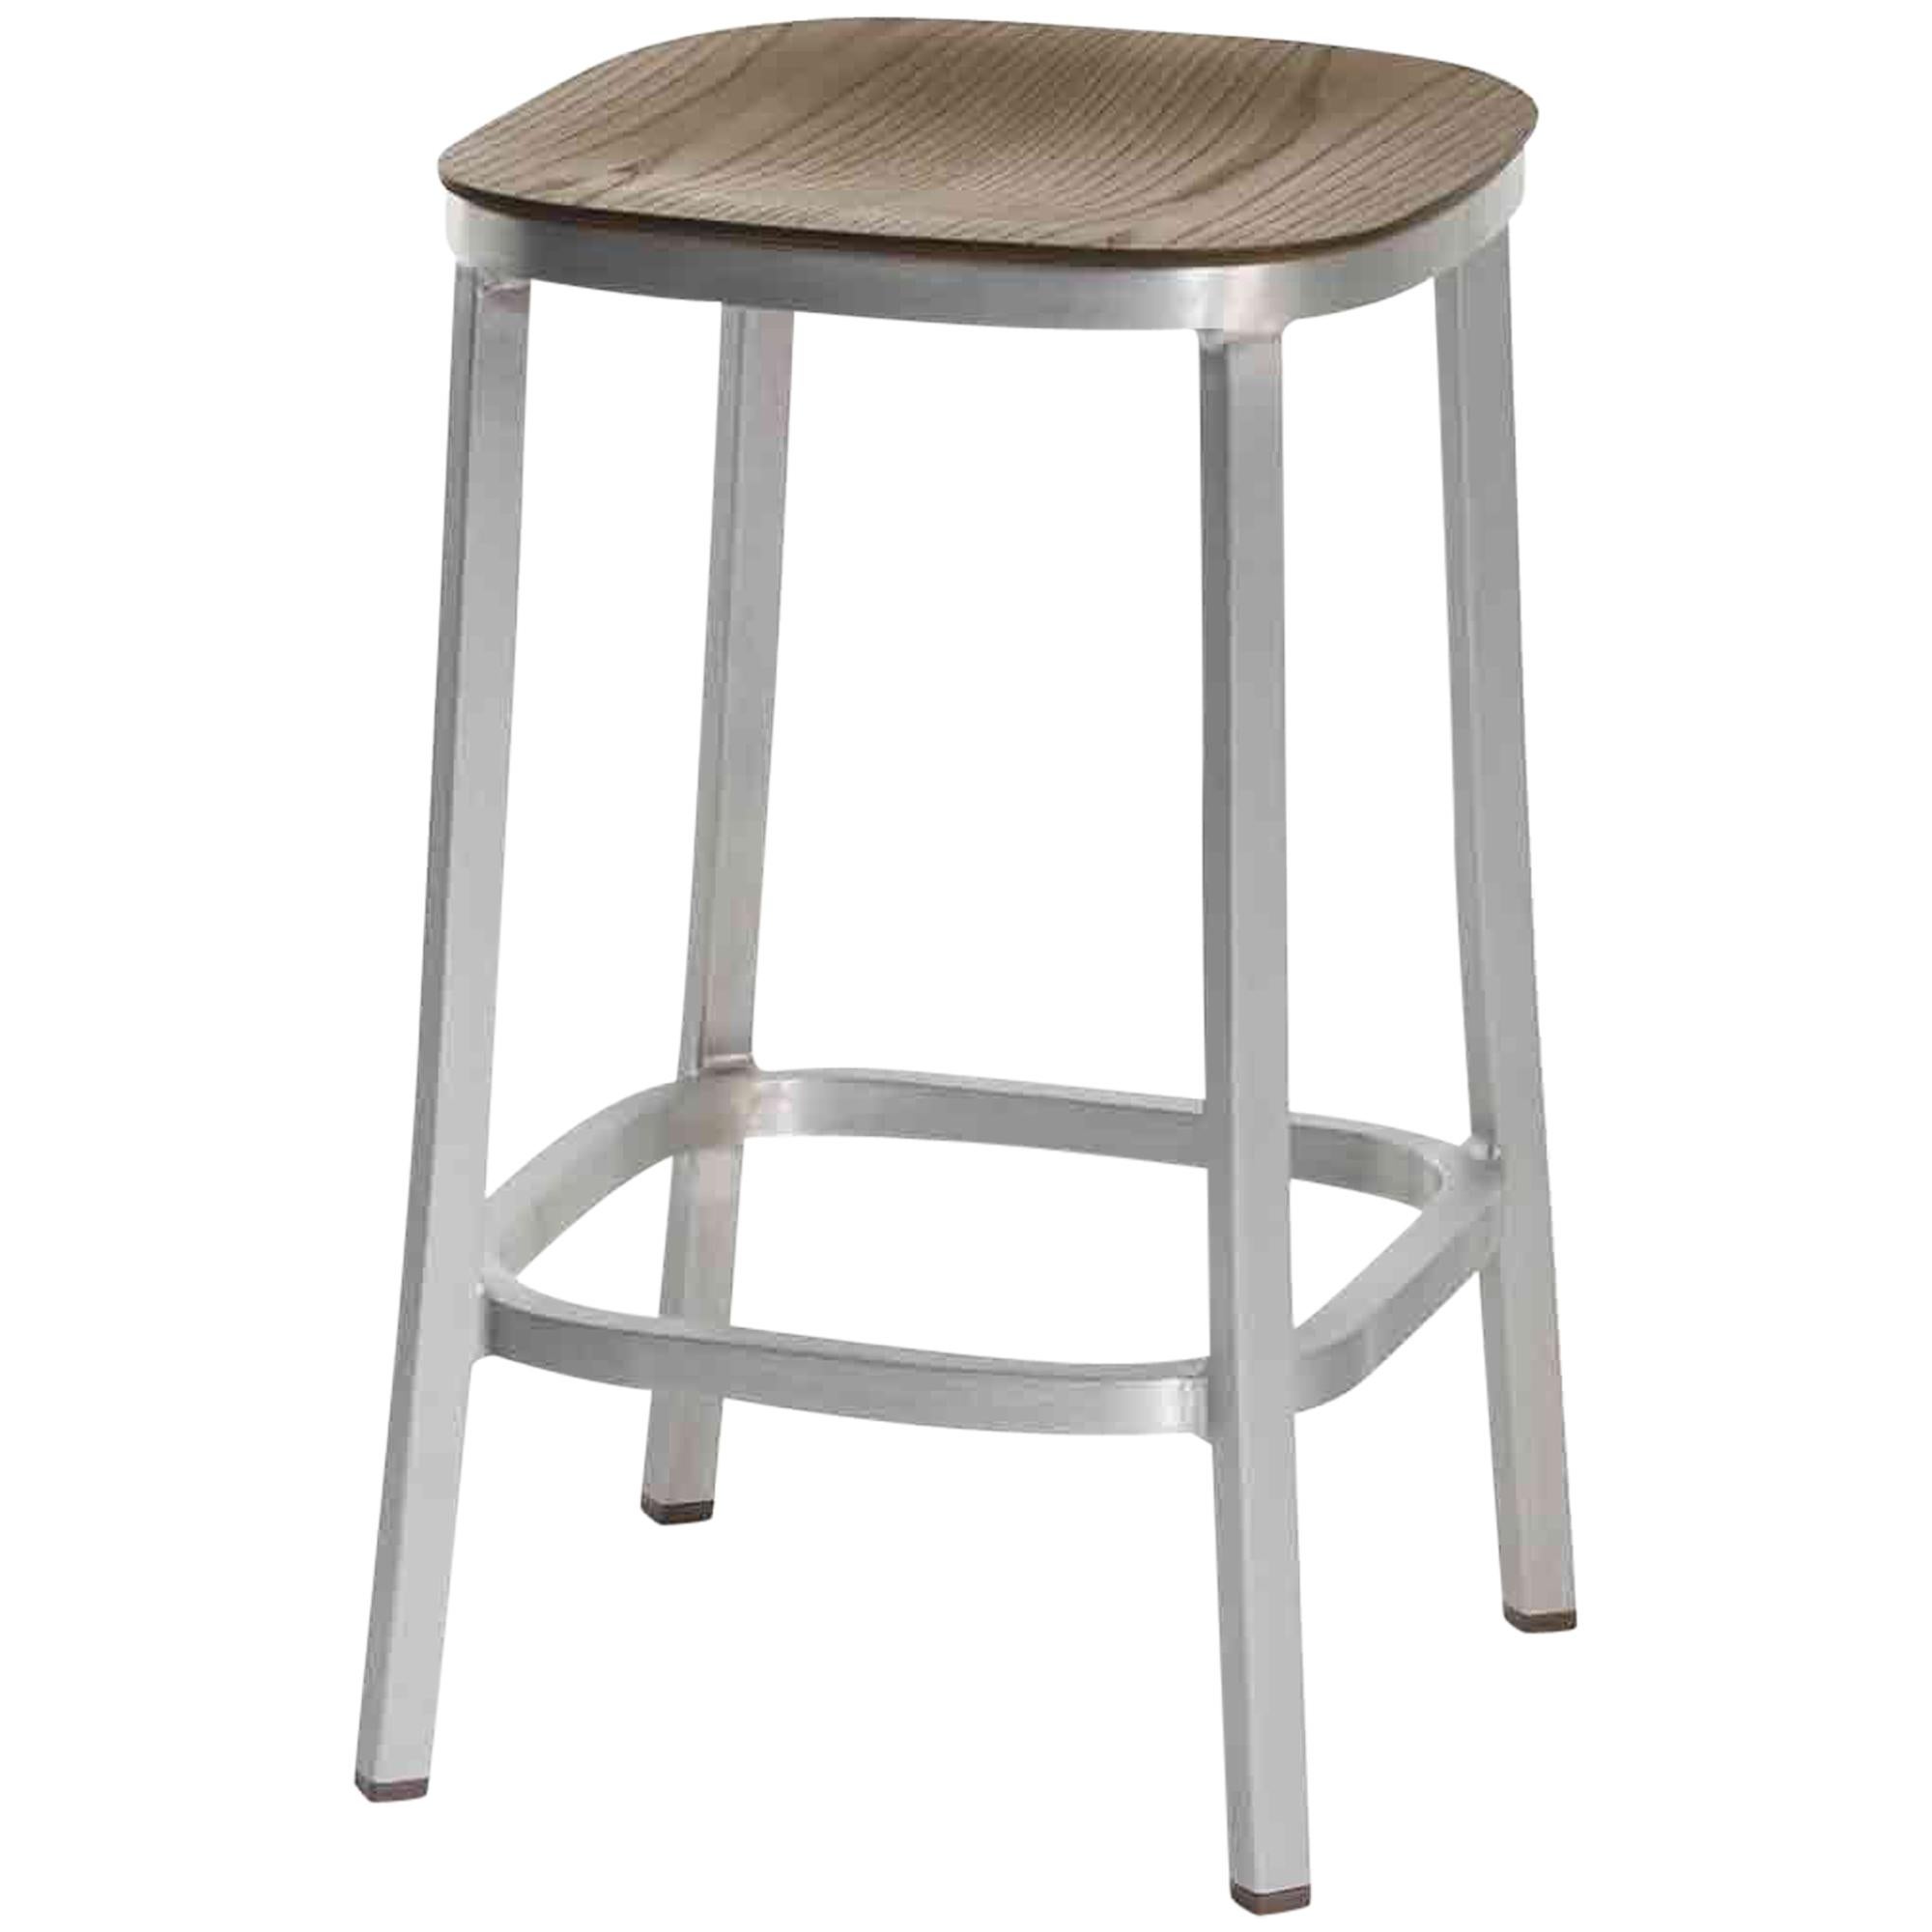 Emeco 1 Inch Counter Stool in Brushed Aluminum and Walnut by Jasper Morrison